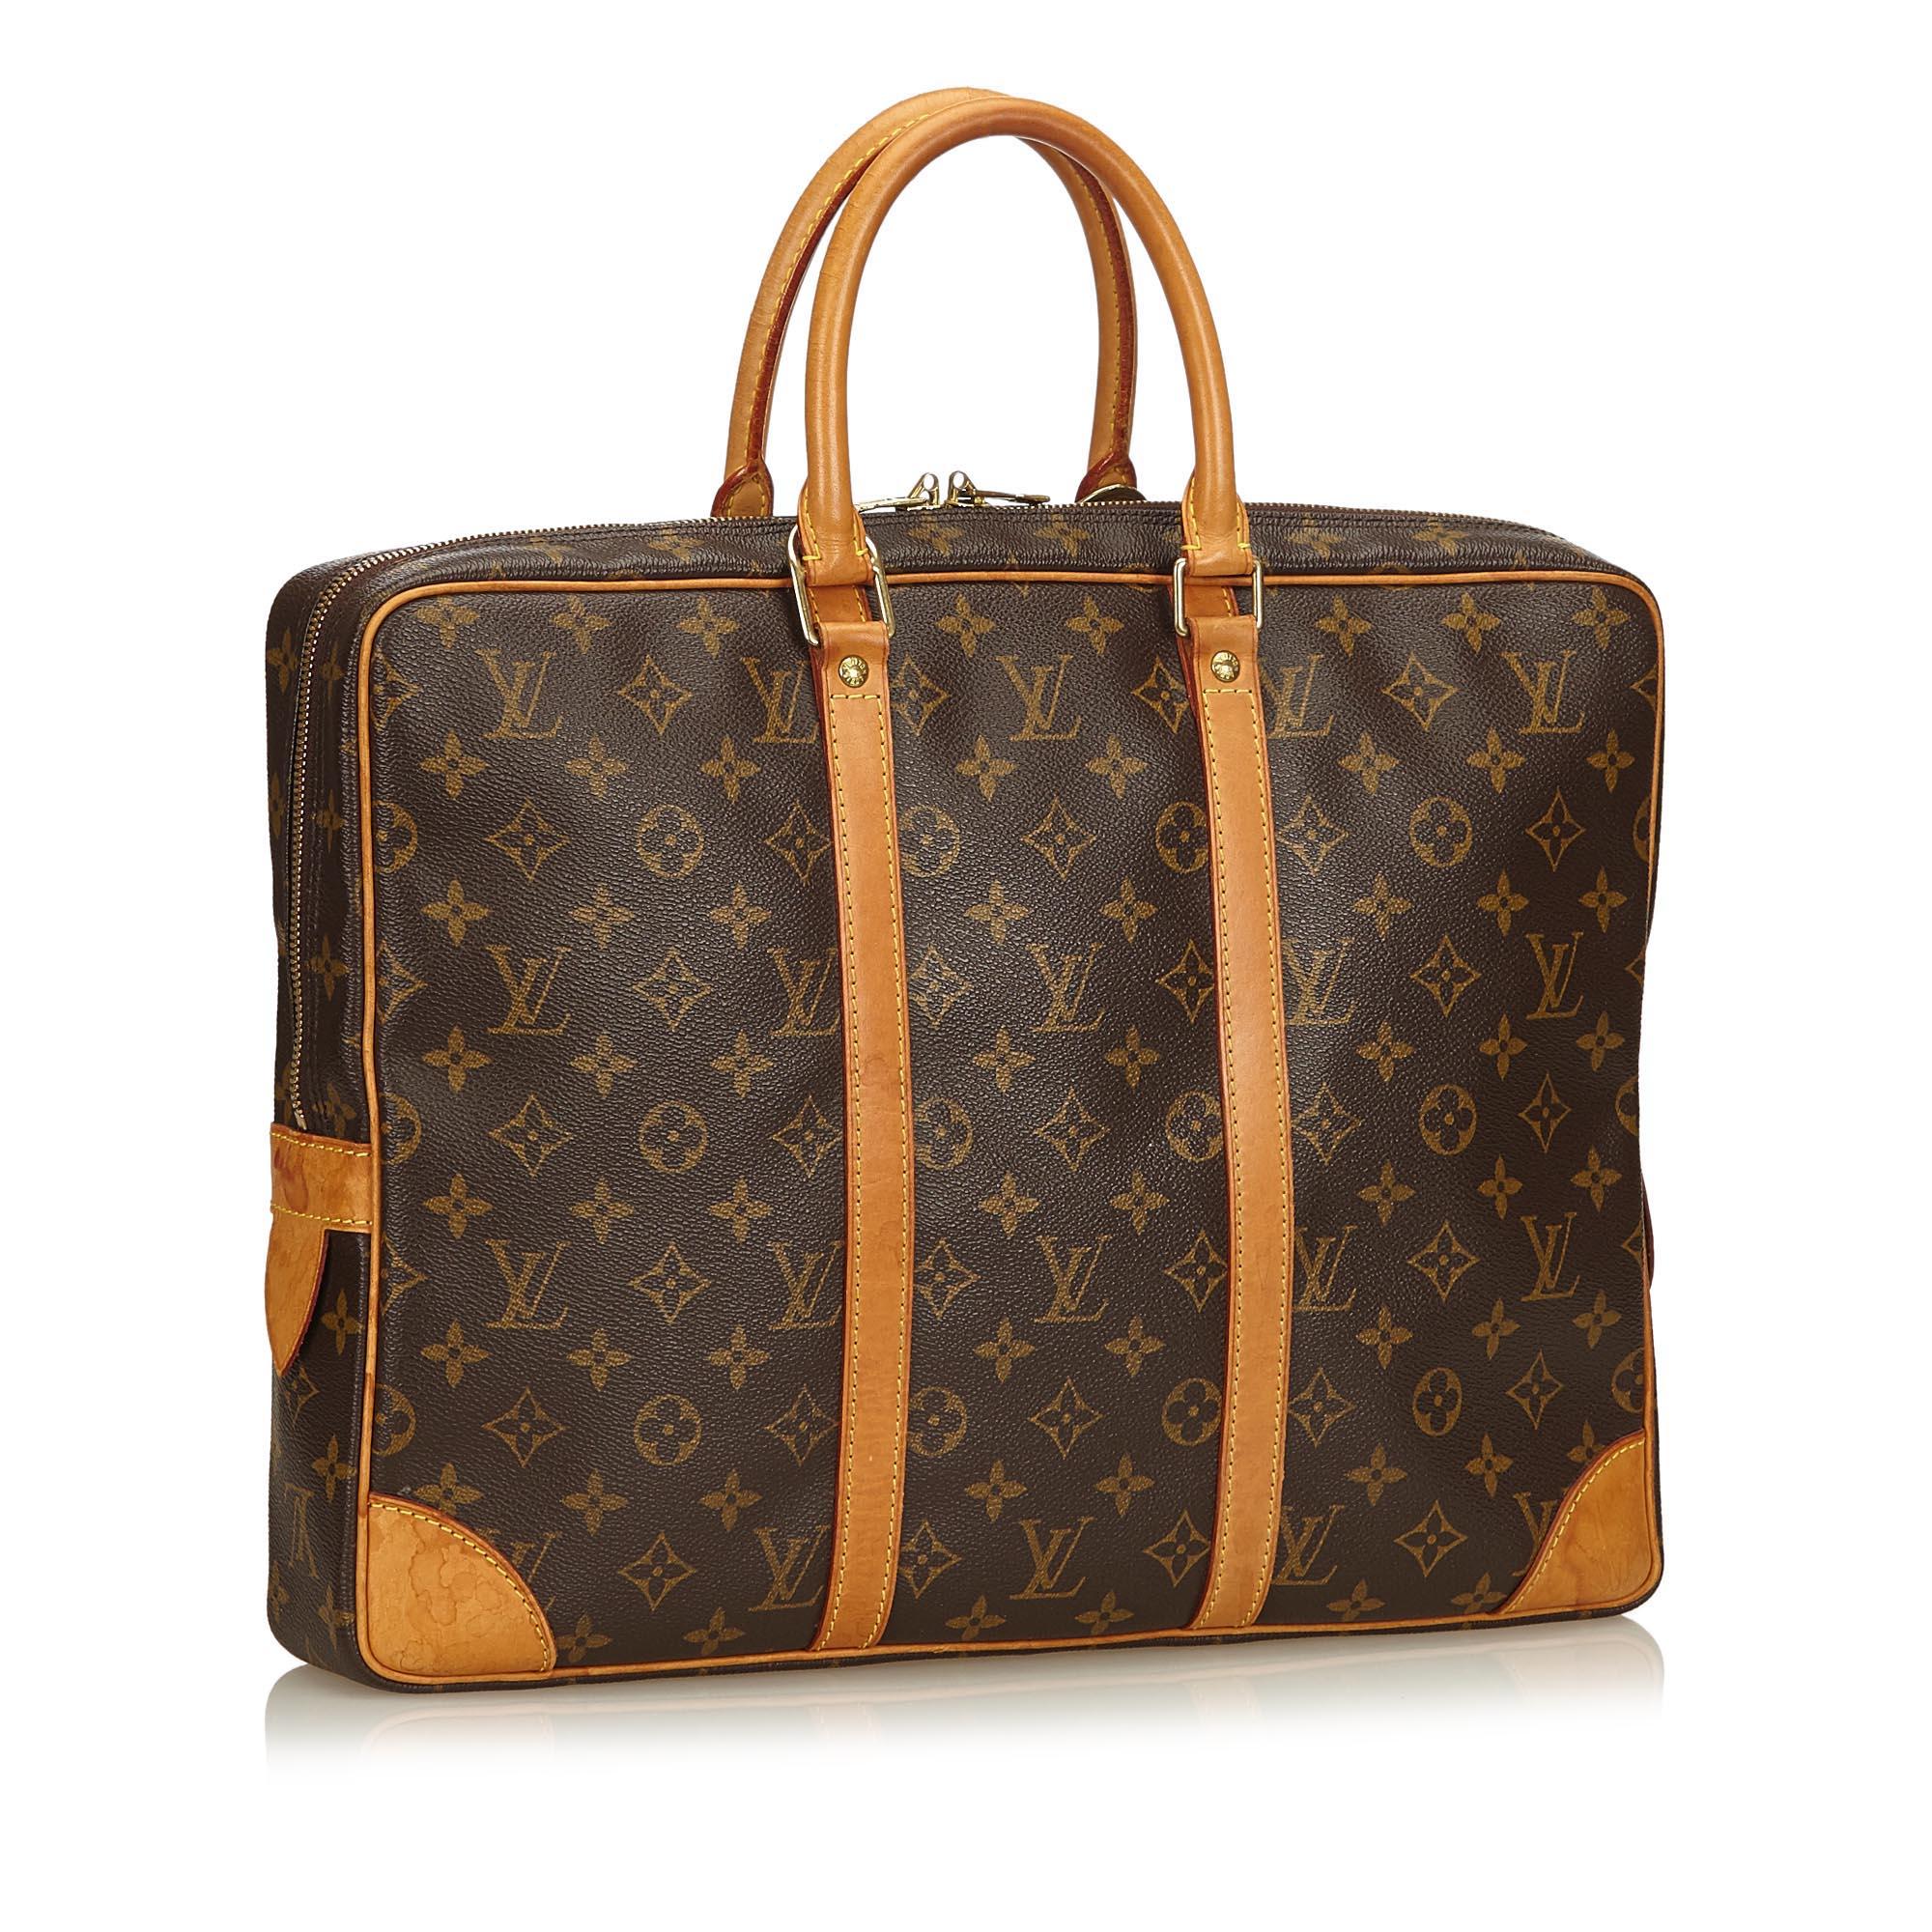 The Porte-Documents Voyage features a monogram canvas body, vachetta trim, rolled leather handles, top zip closure, and interior zip pocket. It carries as B condition rating.

Inclusions: 
This item does not come with inclusions.


Louis Vuitton